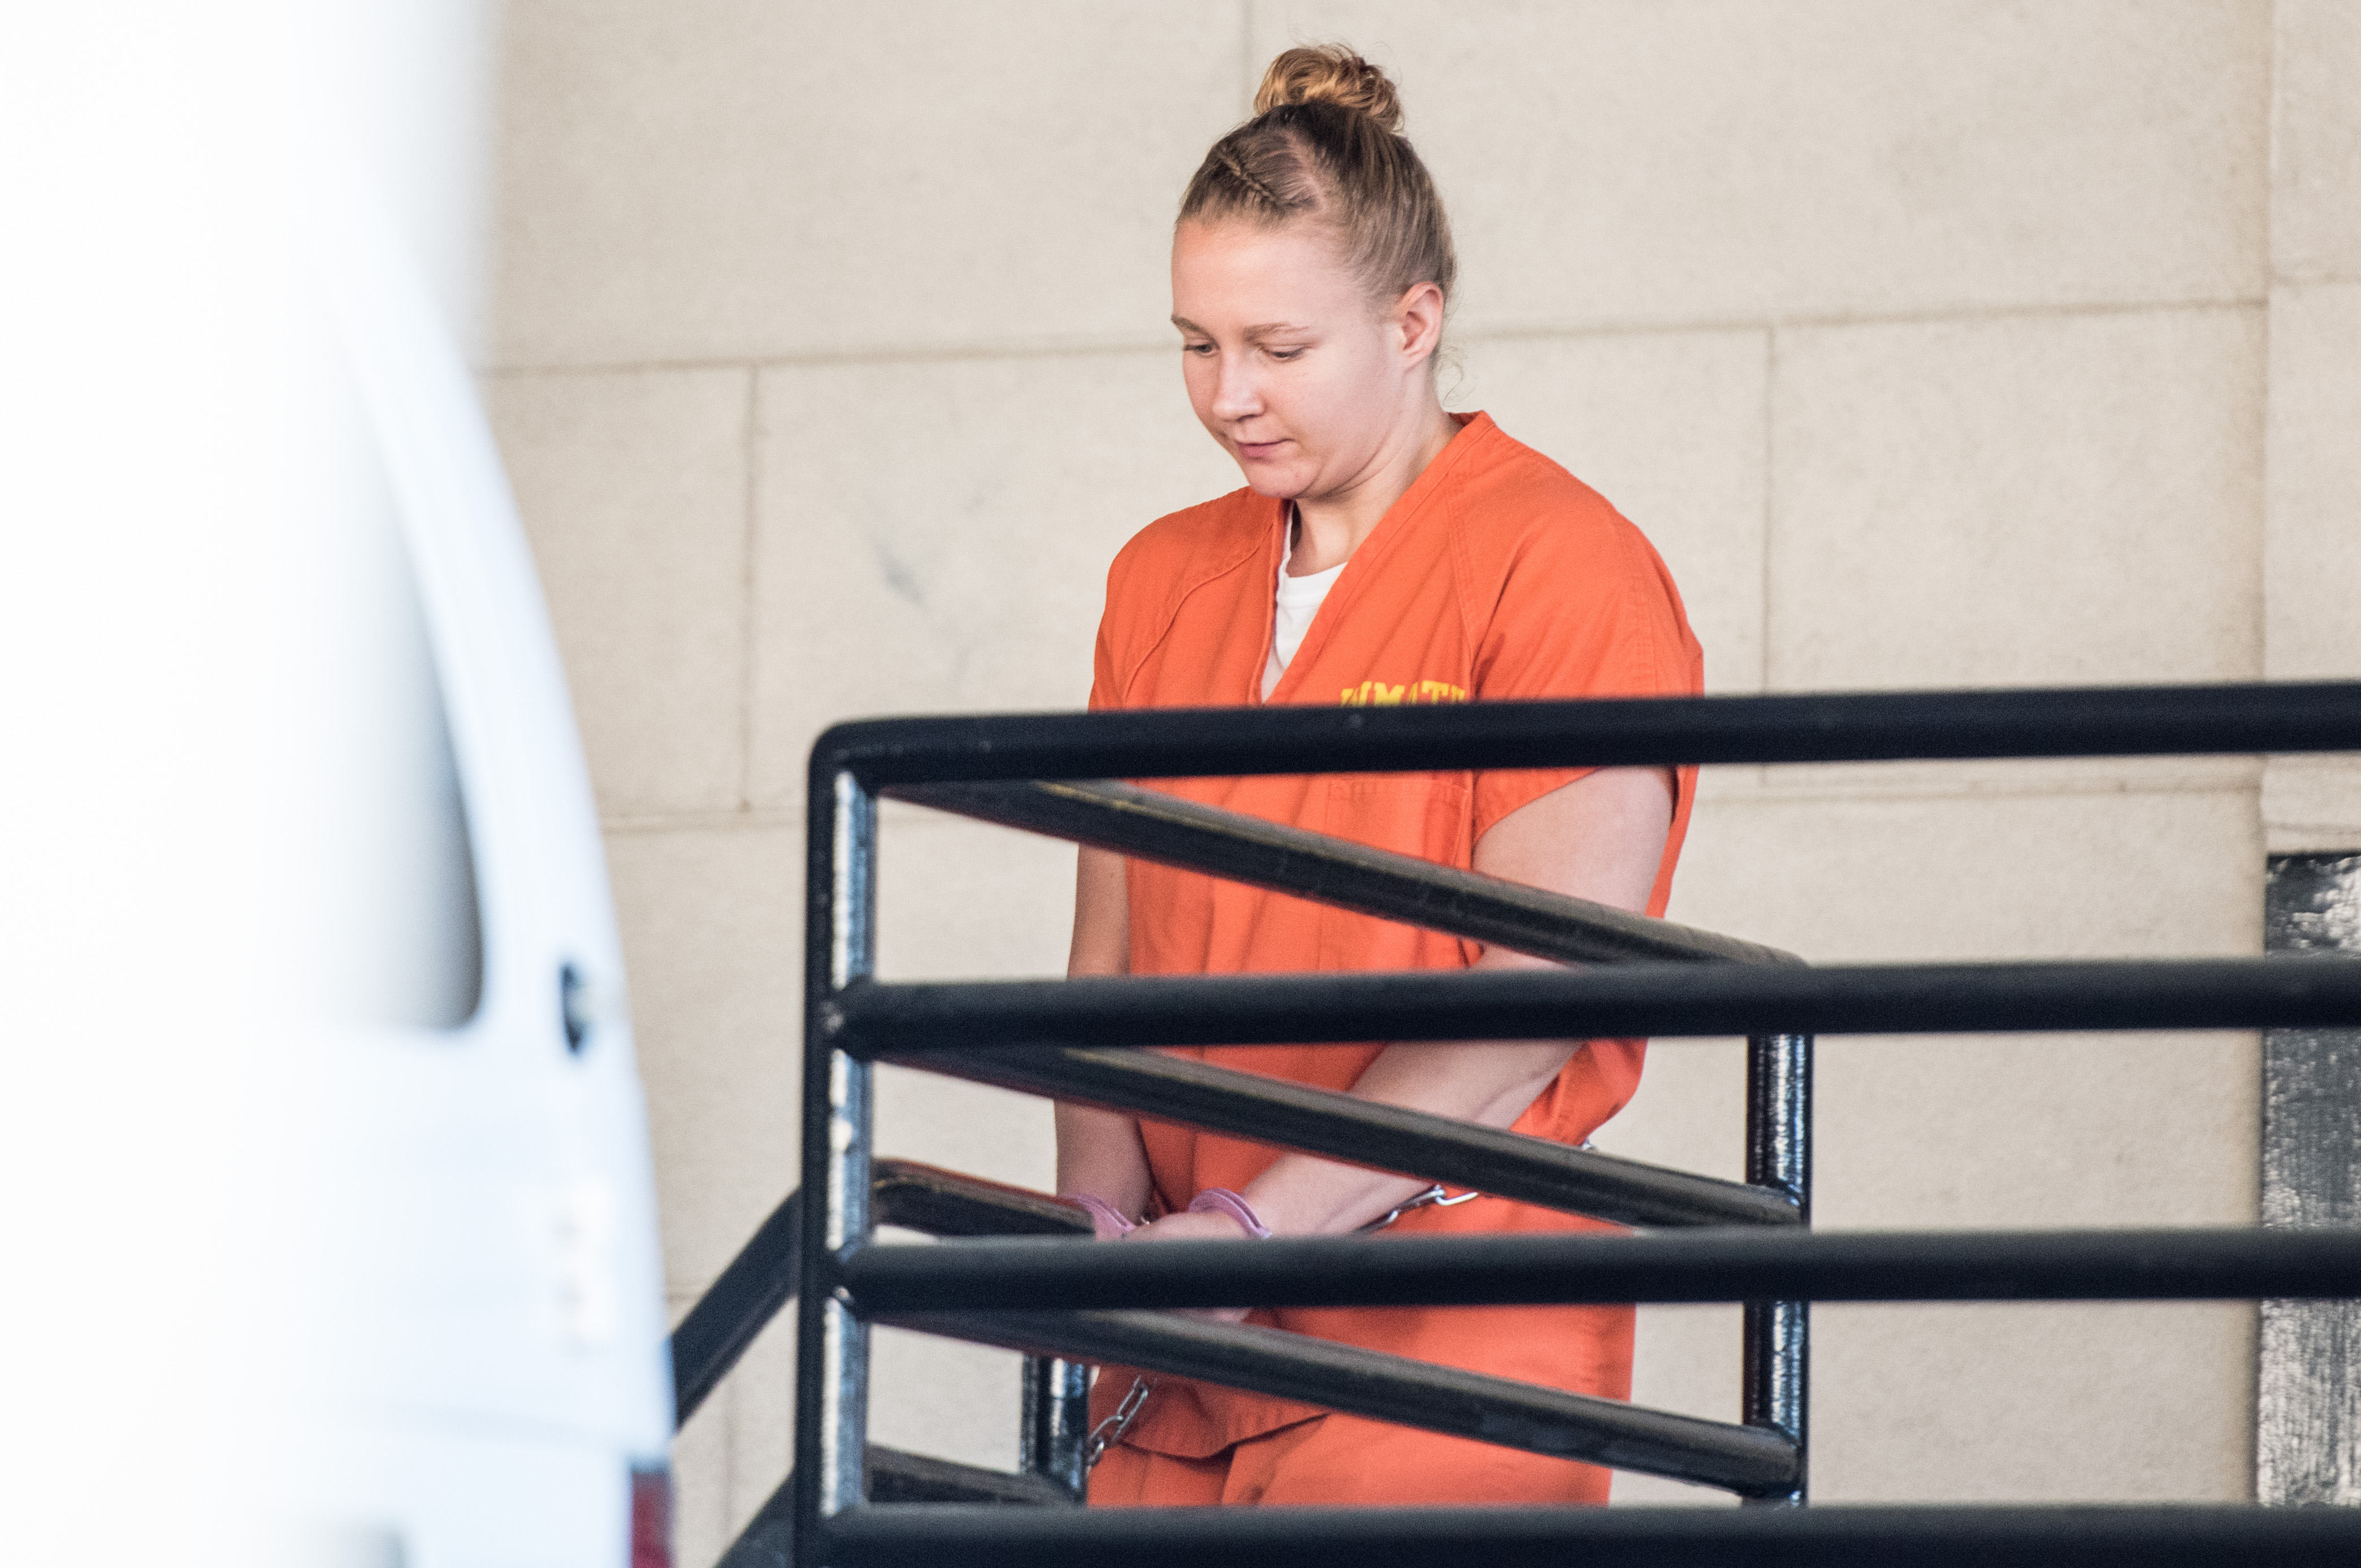 Reality Winner exits the Augusta Courthouse June 8, 2017 in Augusta, Georgia. Winner is an intelligence industry contractor accused of leaking National Security Agency (NSA) documents. Sean Rayford/Getty Images